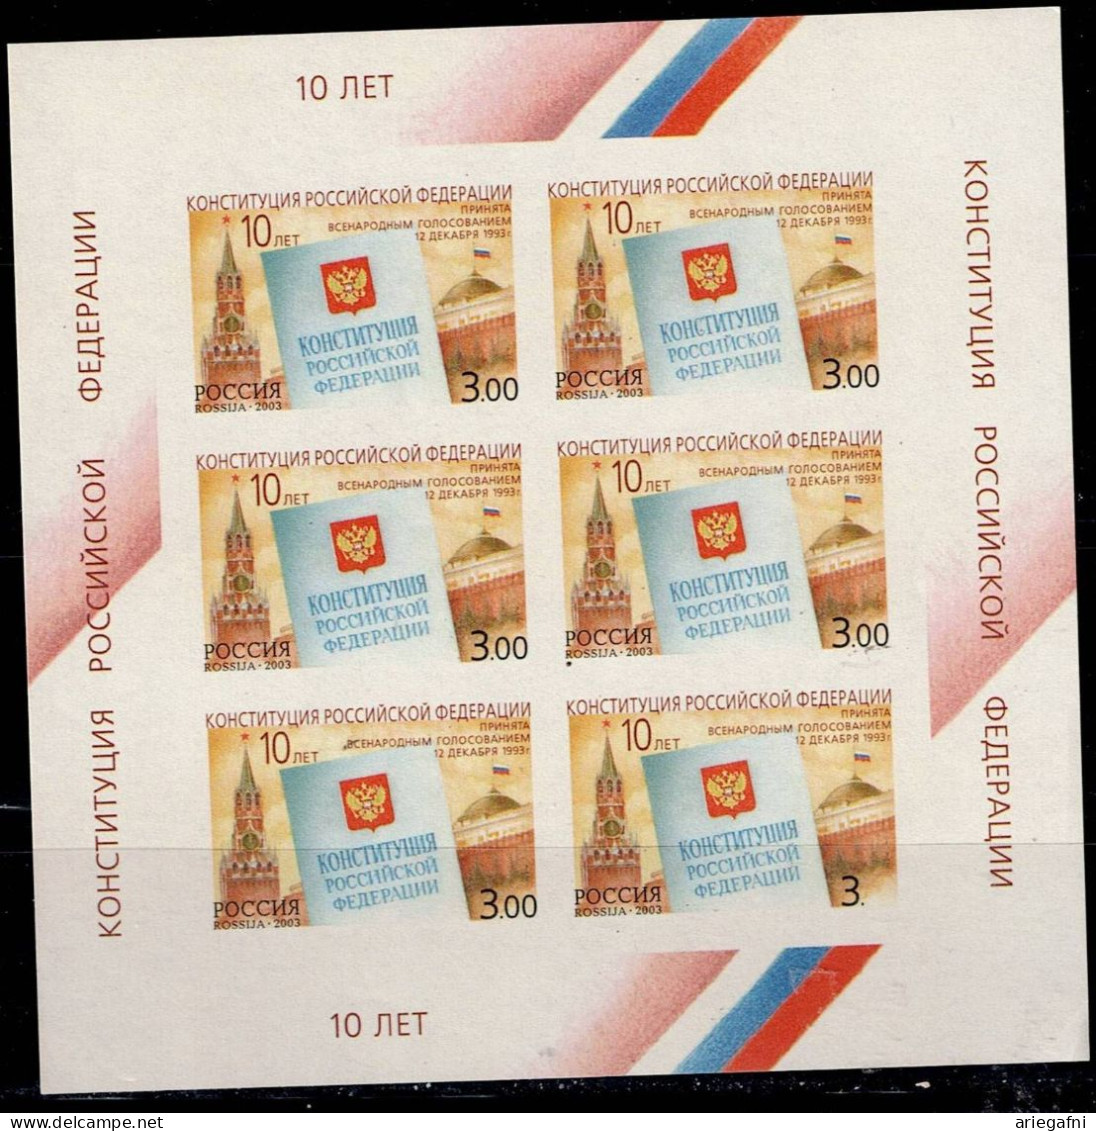 RUSSIA 2003 10 YEARS OF THE RUSSIAN FEDERATION CONSTITUTION MINI SHEET IMPERF PROOF MI No 1128 MNH VF!! - Errors & Oddities